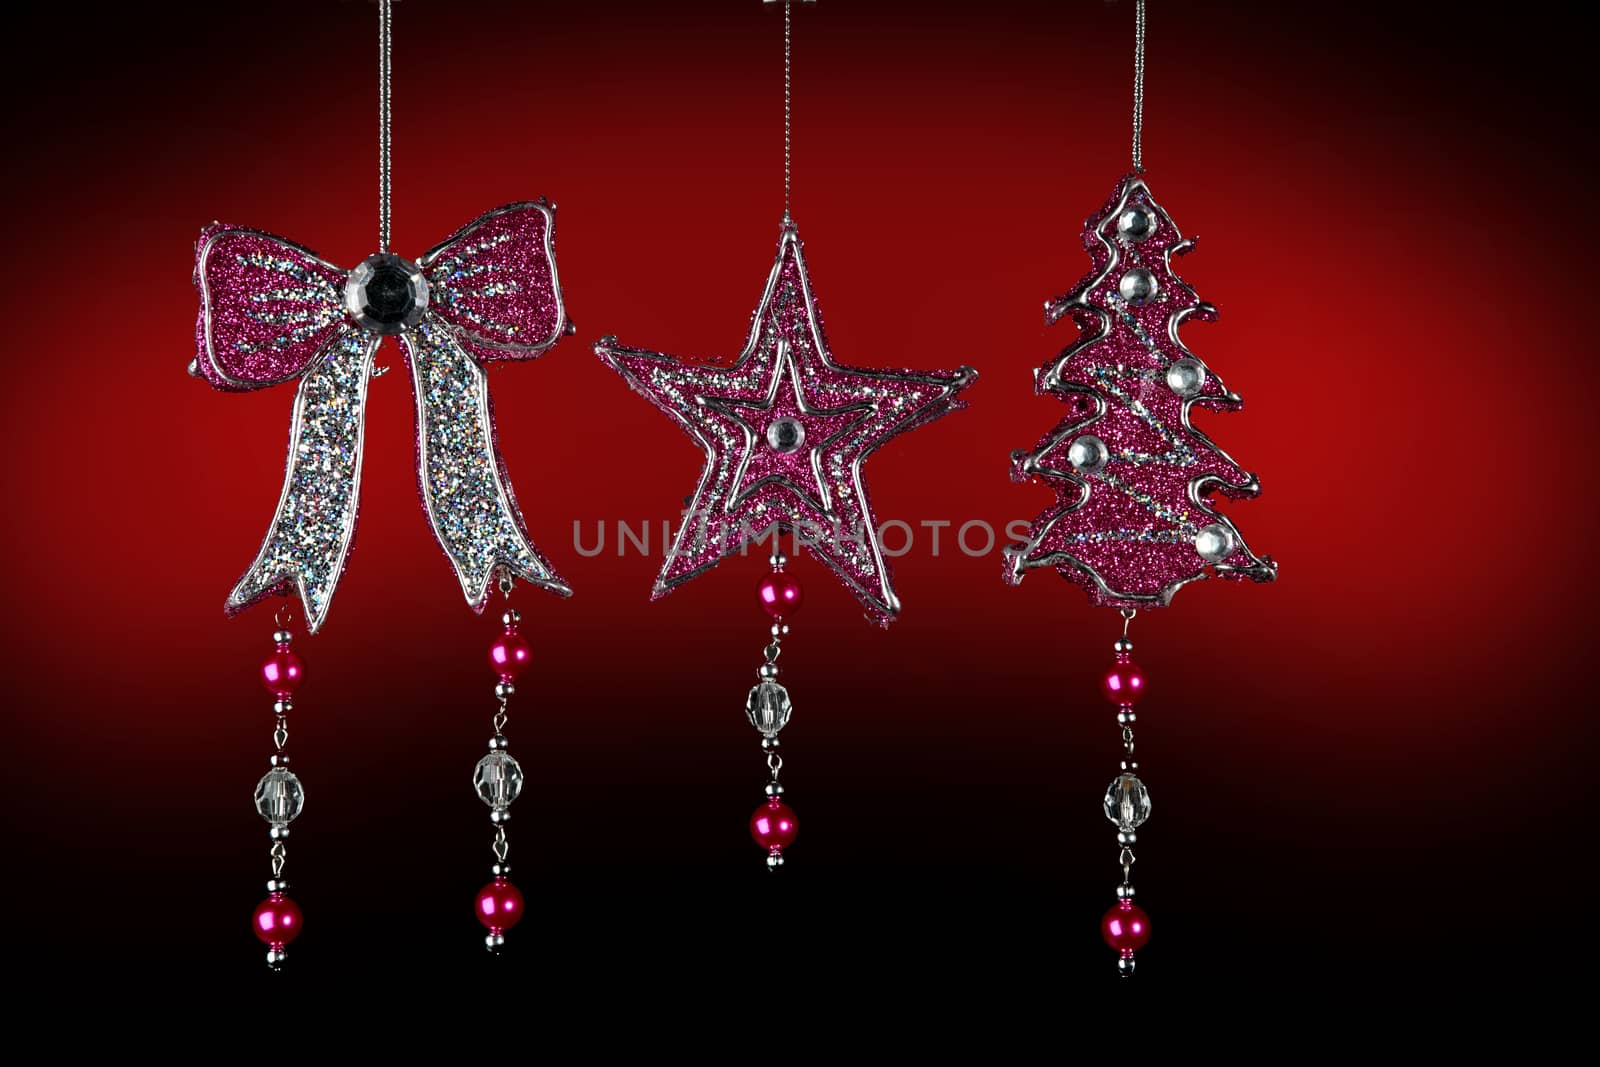 christmas tree decorations on red by diecidodici